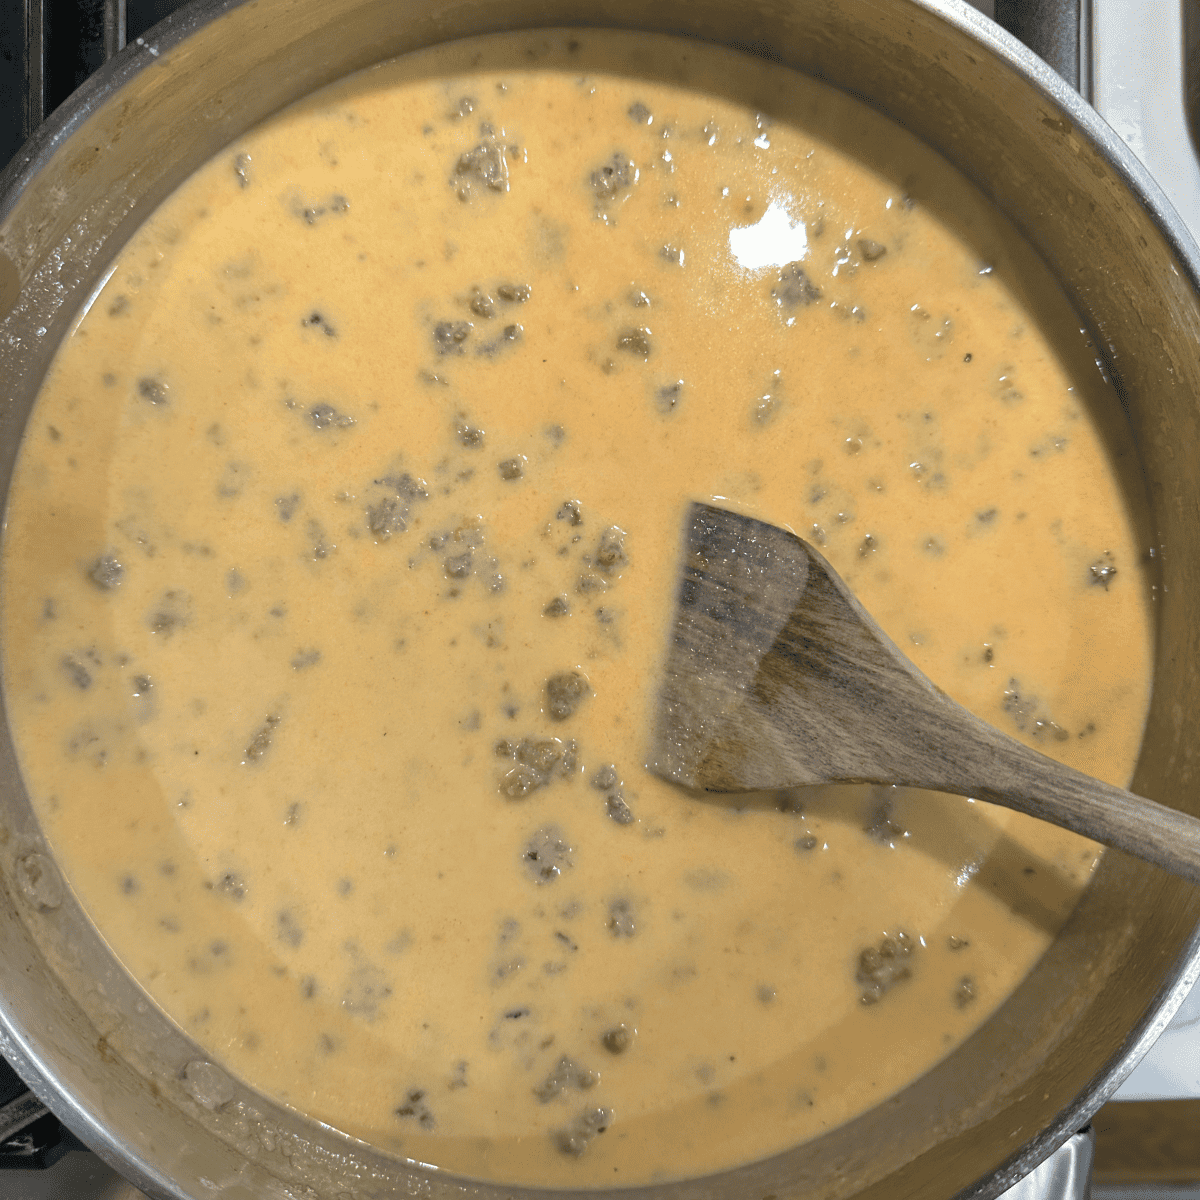 Chorizo sausage gravy simmering on the stove with a wooden spoon.